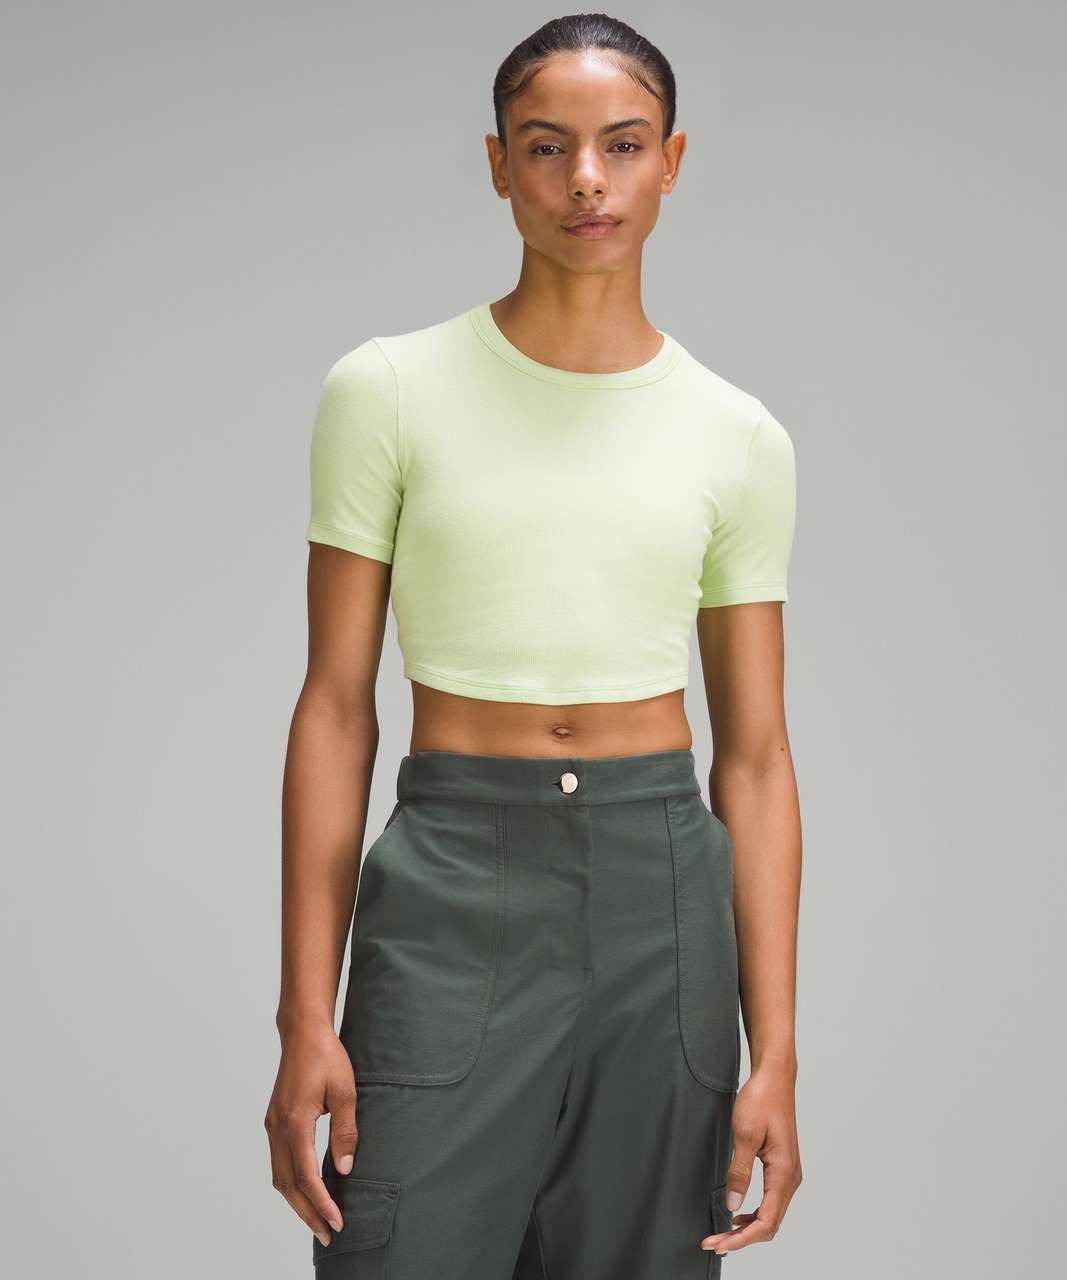 Lululemon Hold Tight Cropped T-Shirt - Spark Green